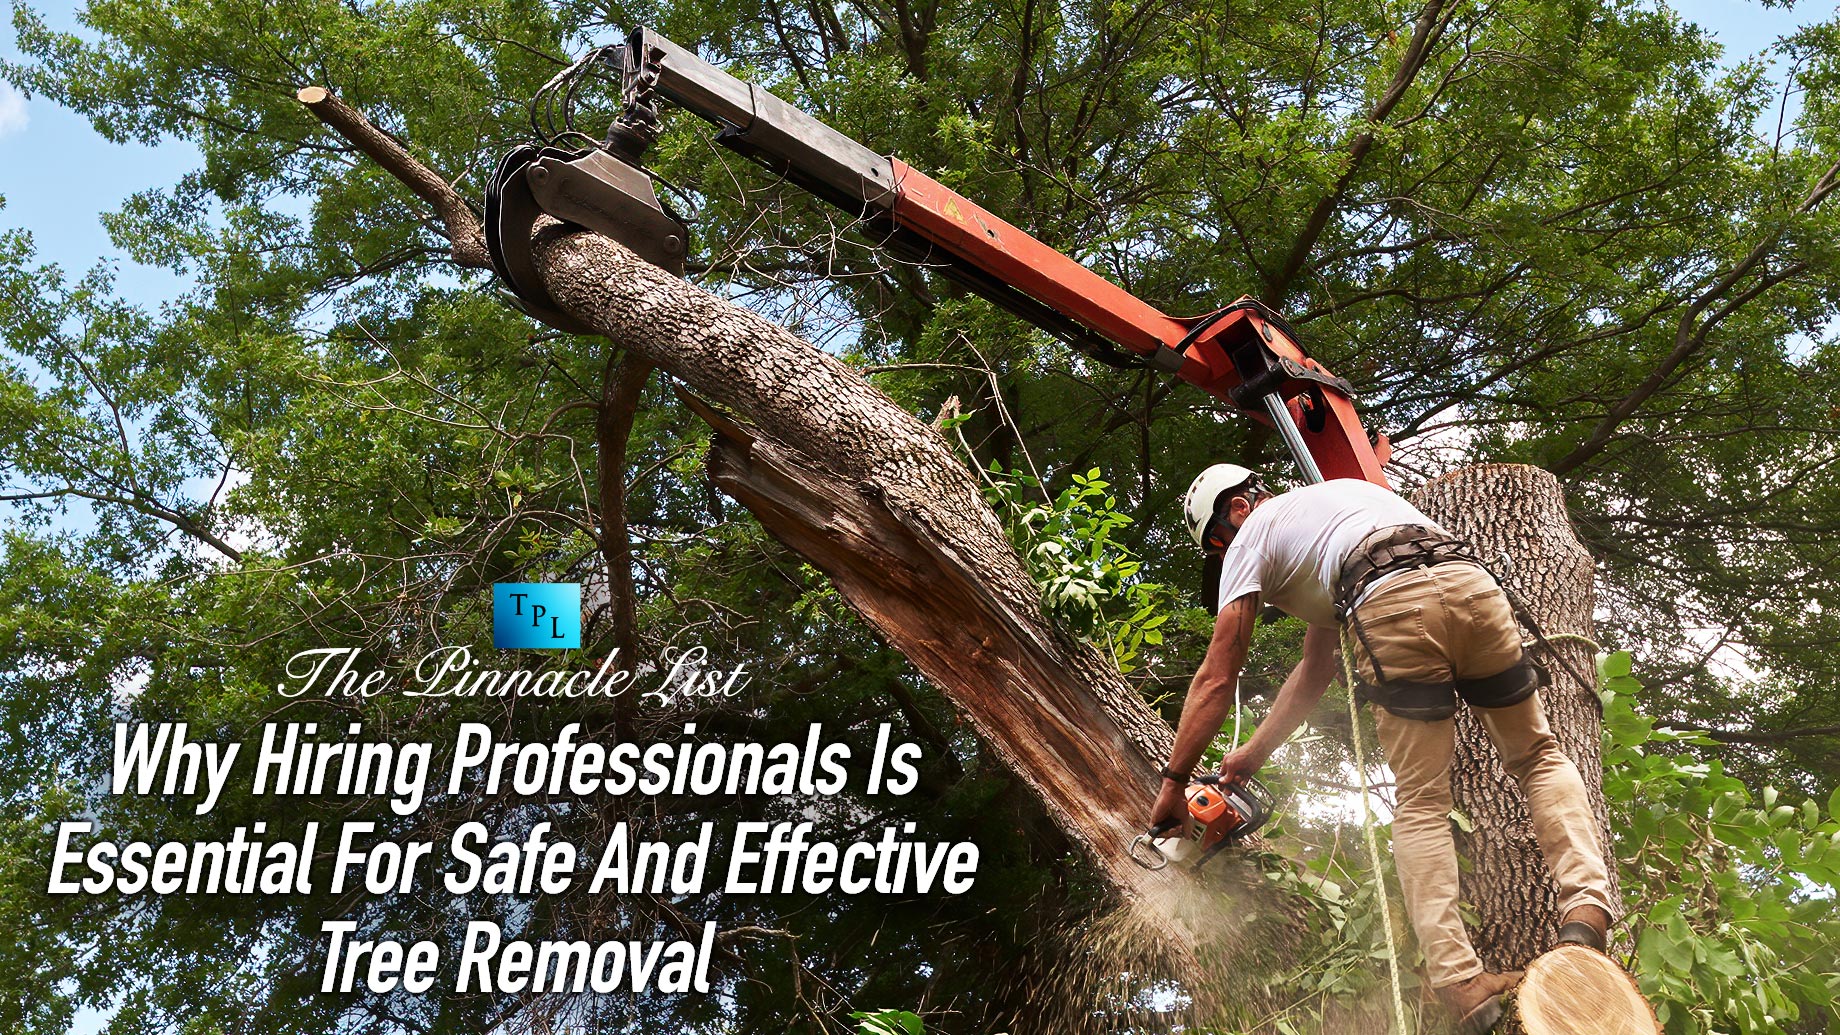 Why Hiring Professionals Is Essential For Safe And Effective Tree Removal